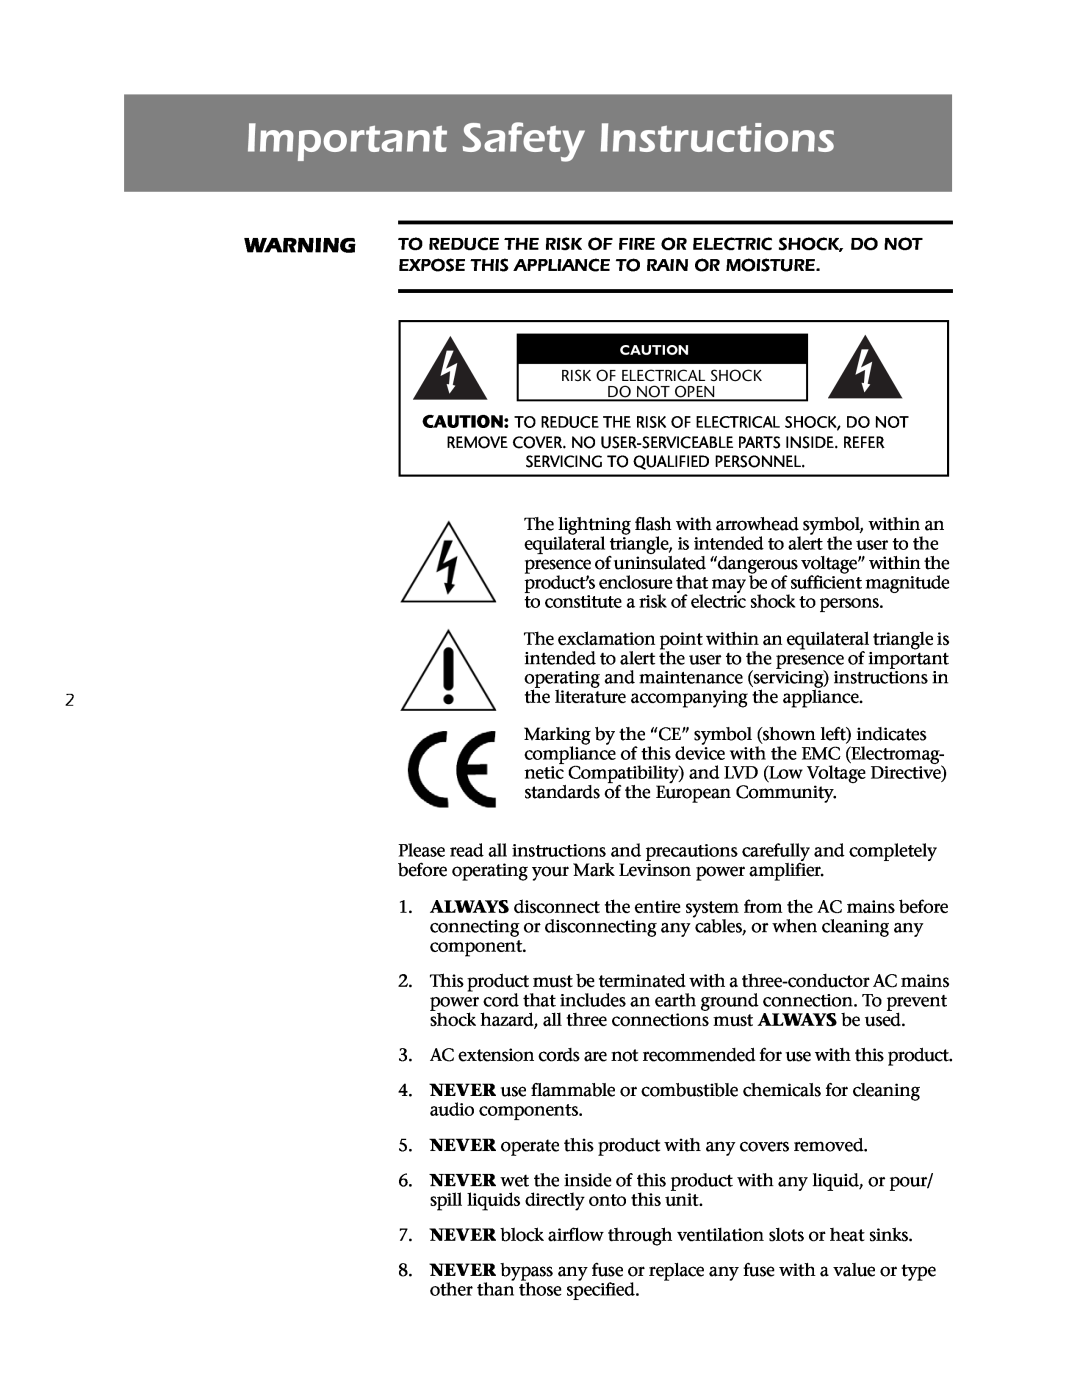 Mark Levinson 433 owner manual Important Safety Instructions 